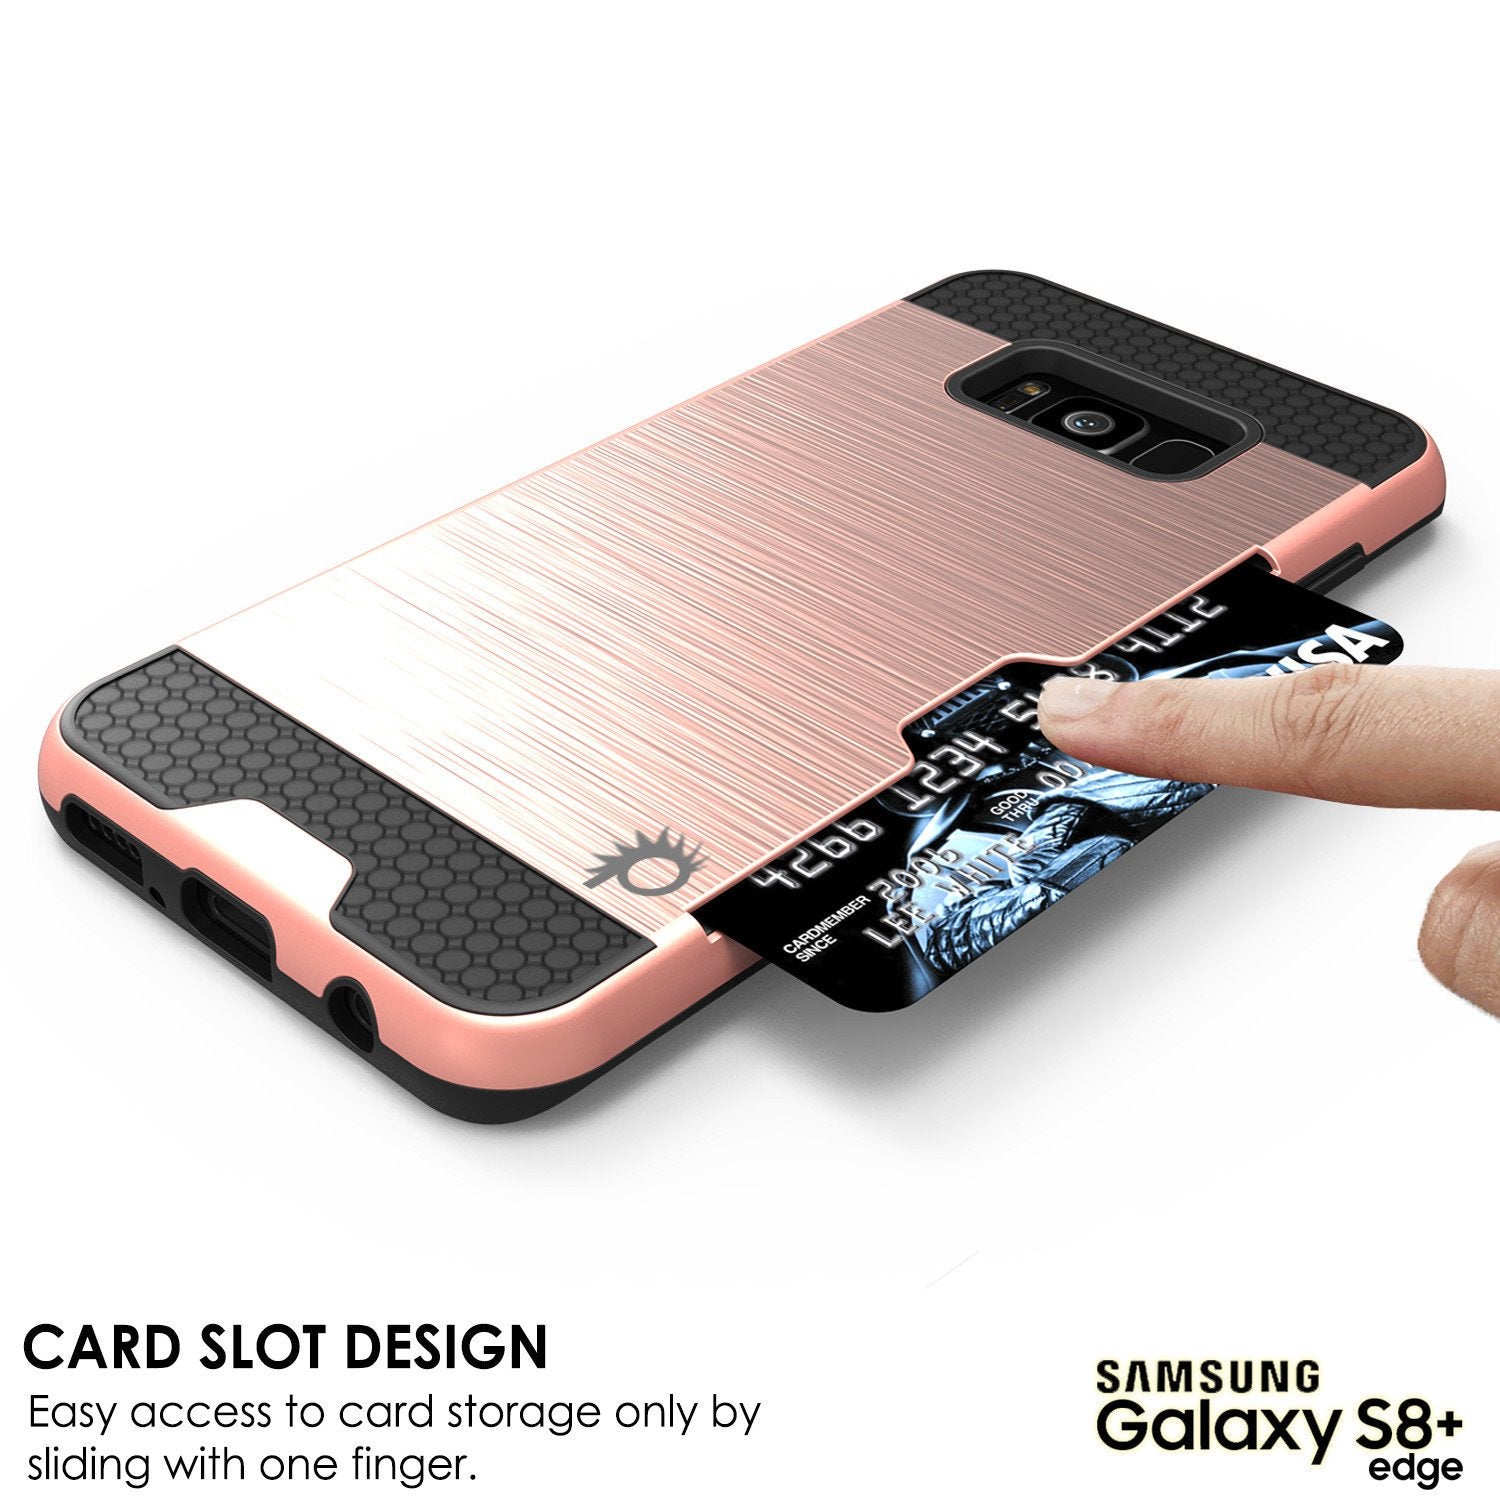 Galaxy S8 Plus Case, PUNKcase [SLOT Series] [Slim Fit] Dual-Layer Armor Cover w/Integrated Anti-Shock System, Credit Card Slot & PunkShield Screen Protector for Samsung Galaxy S8+ [Rose Gold] - PunkCase NZ